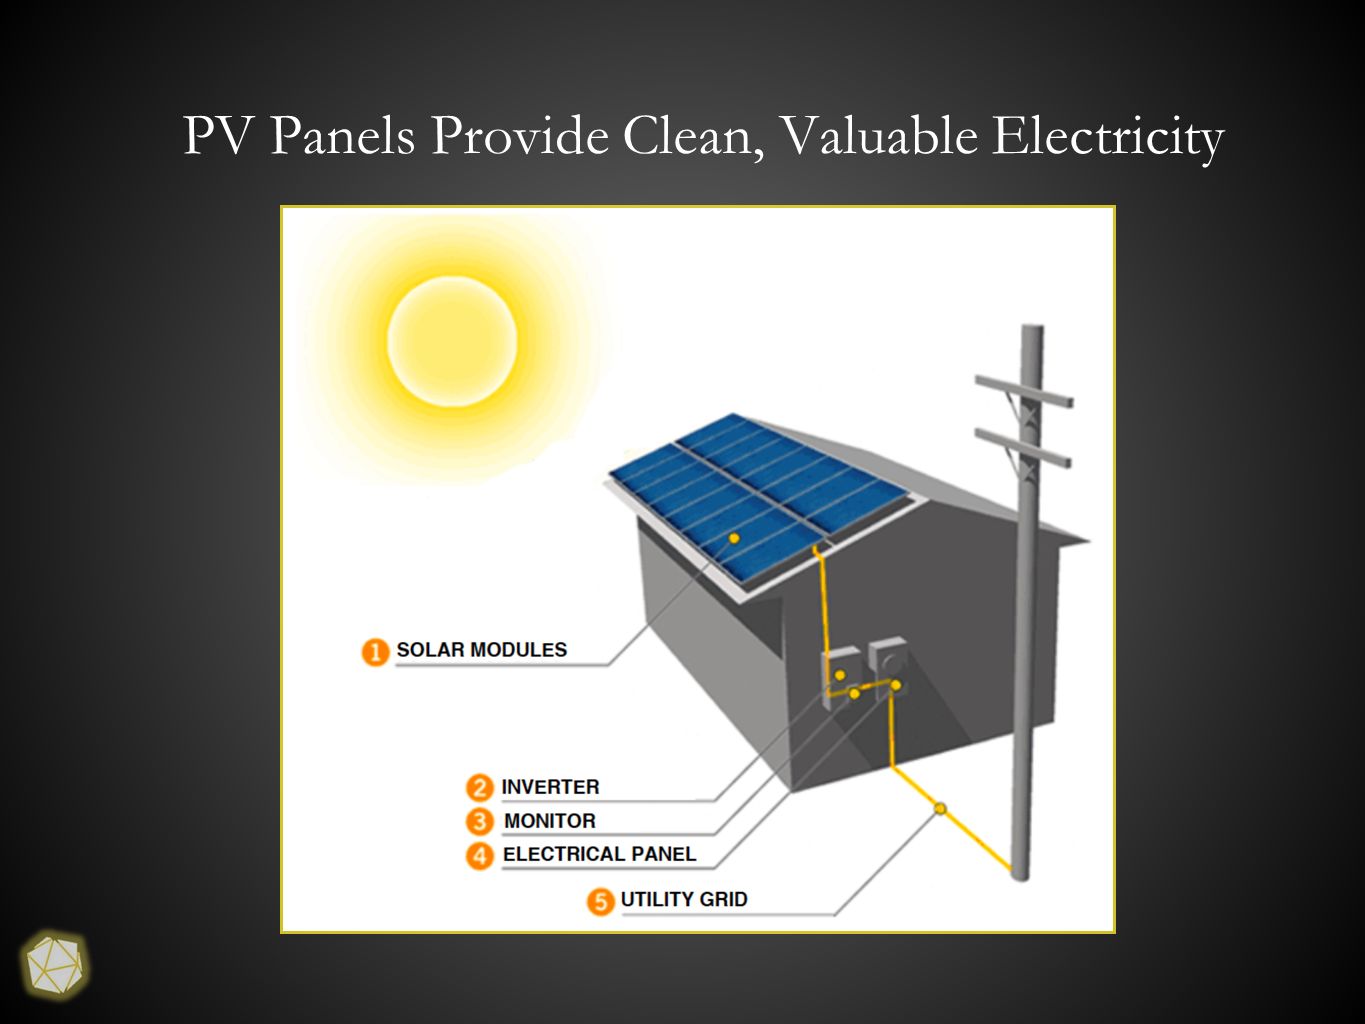 PV Panels Provide Clean, Valuable Electricity